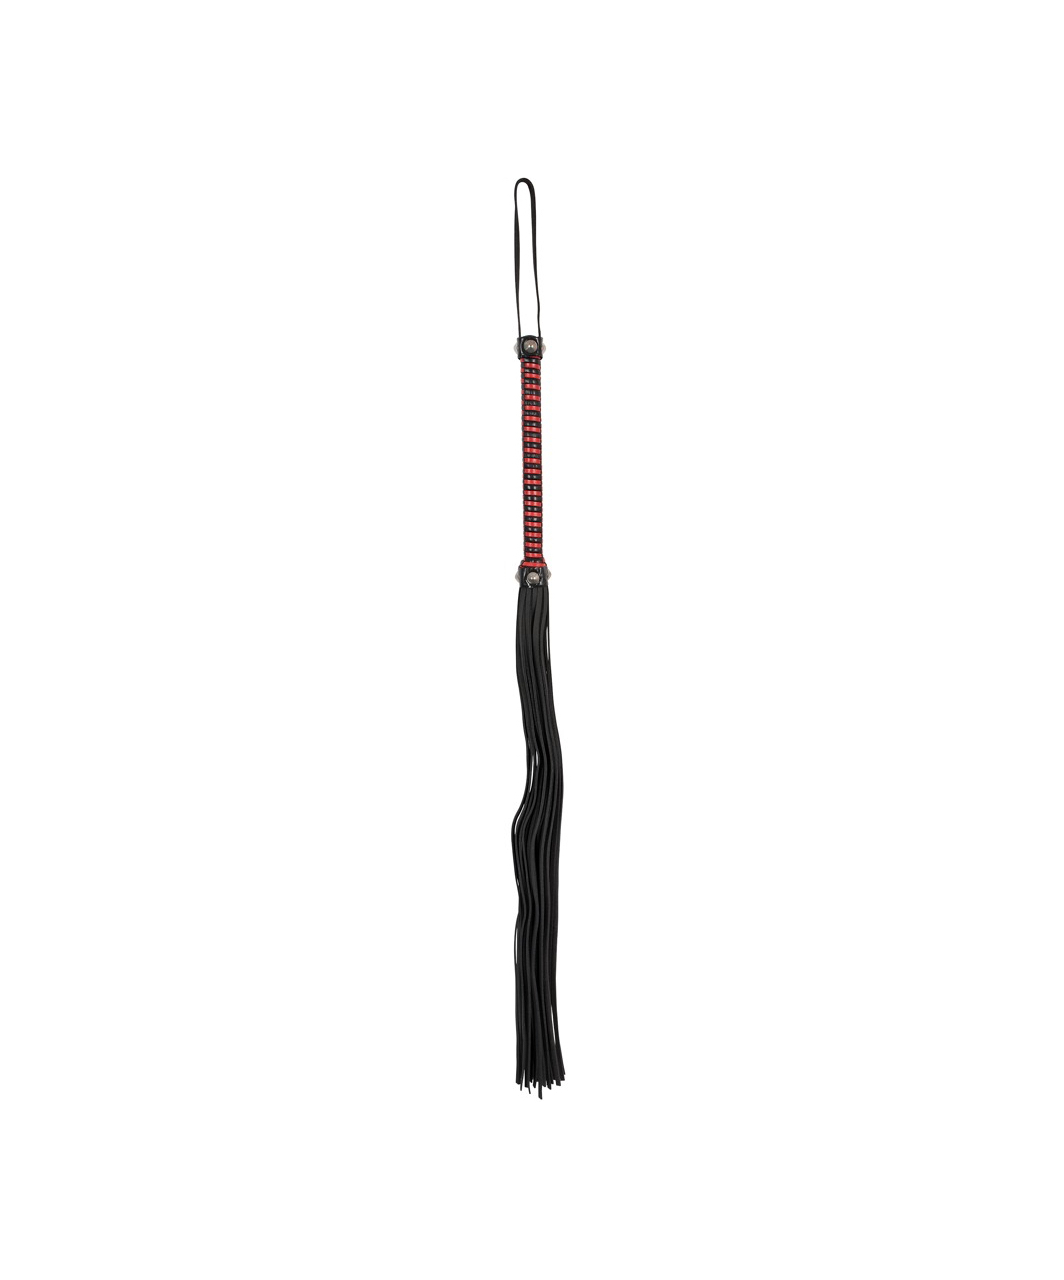 Zado leather whip with black & red weaved handle